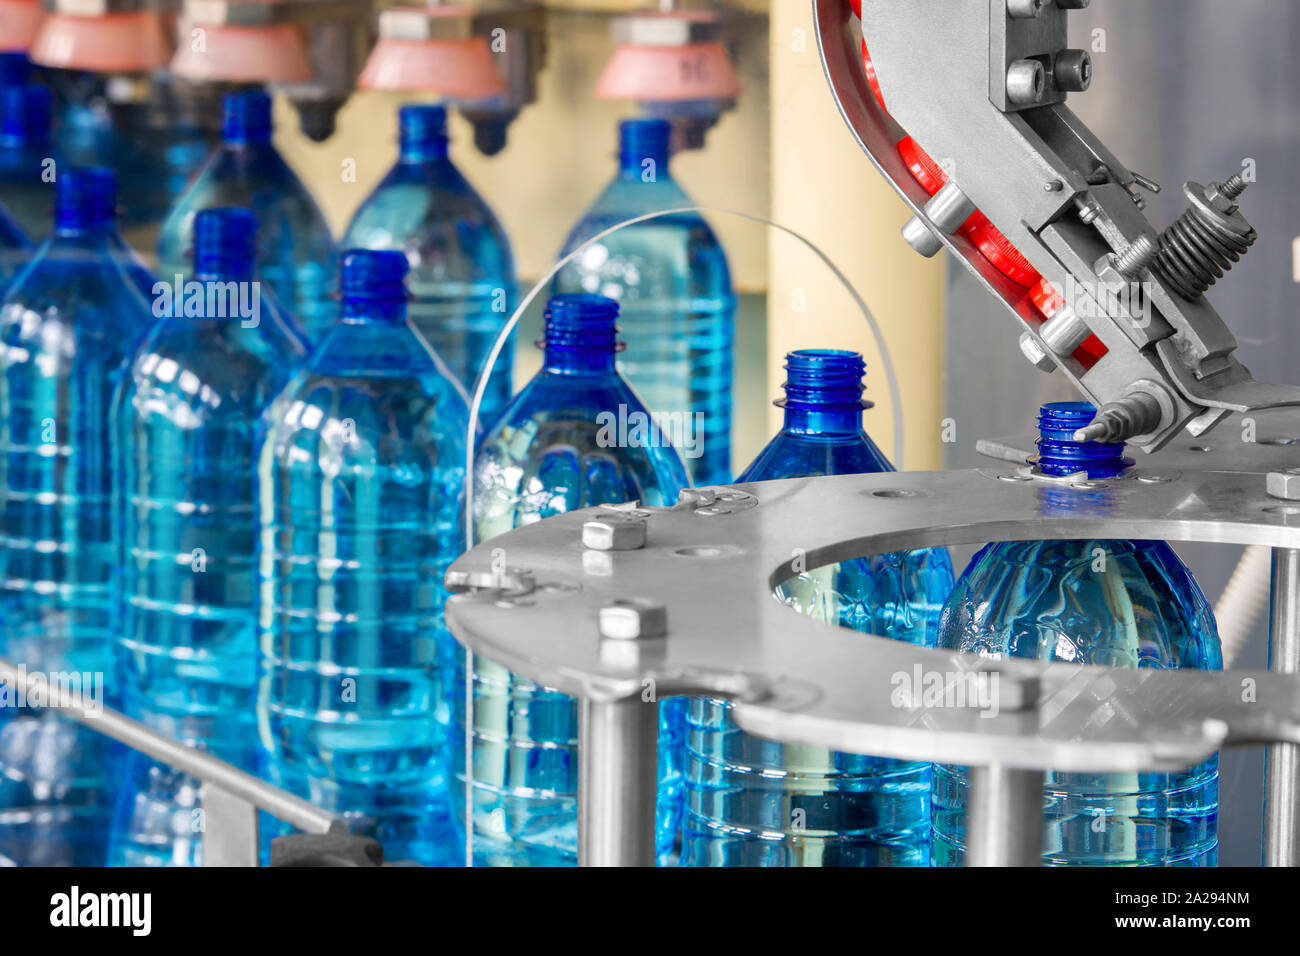 See inside the factory of water bottle manufacturer Simple Modern